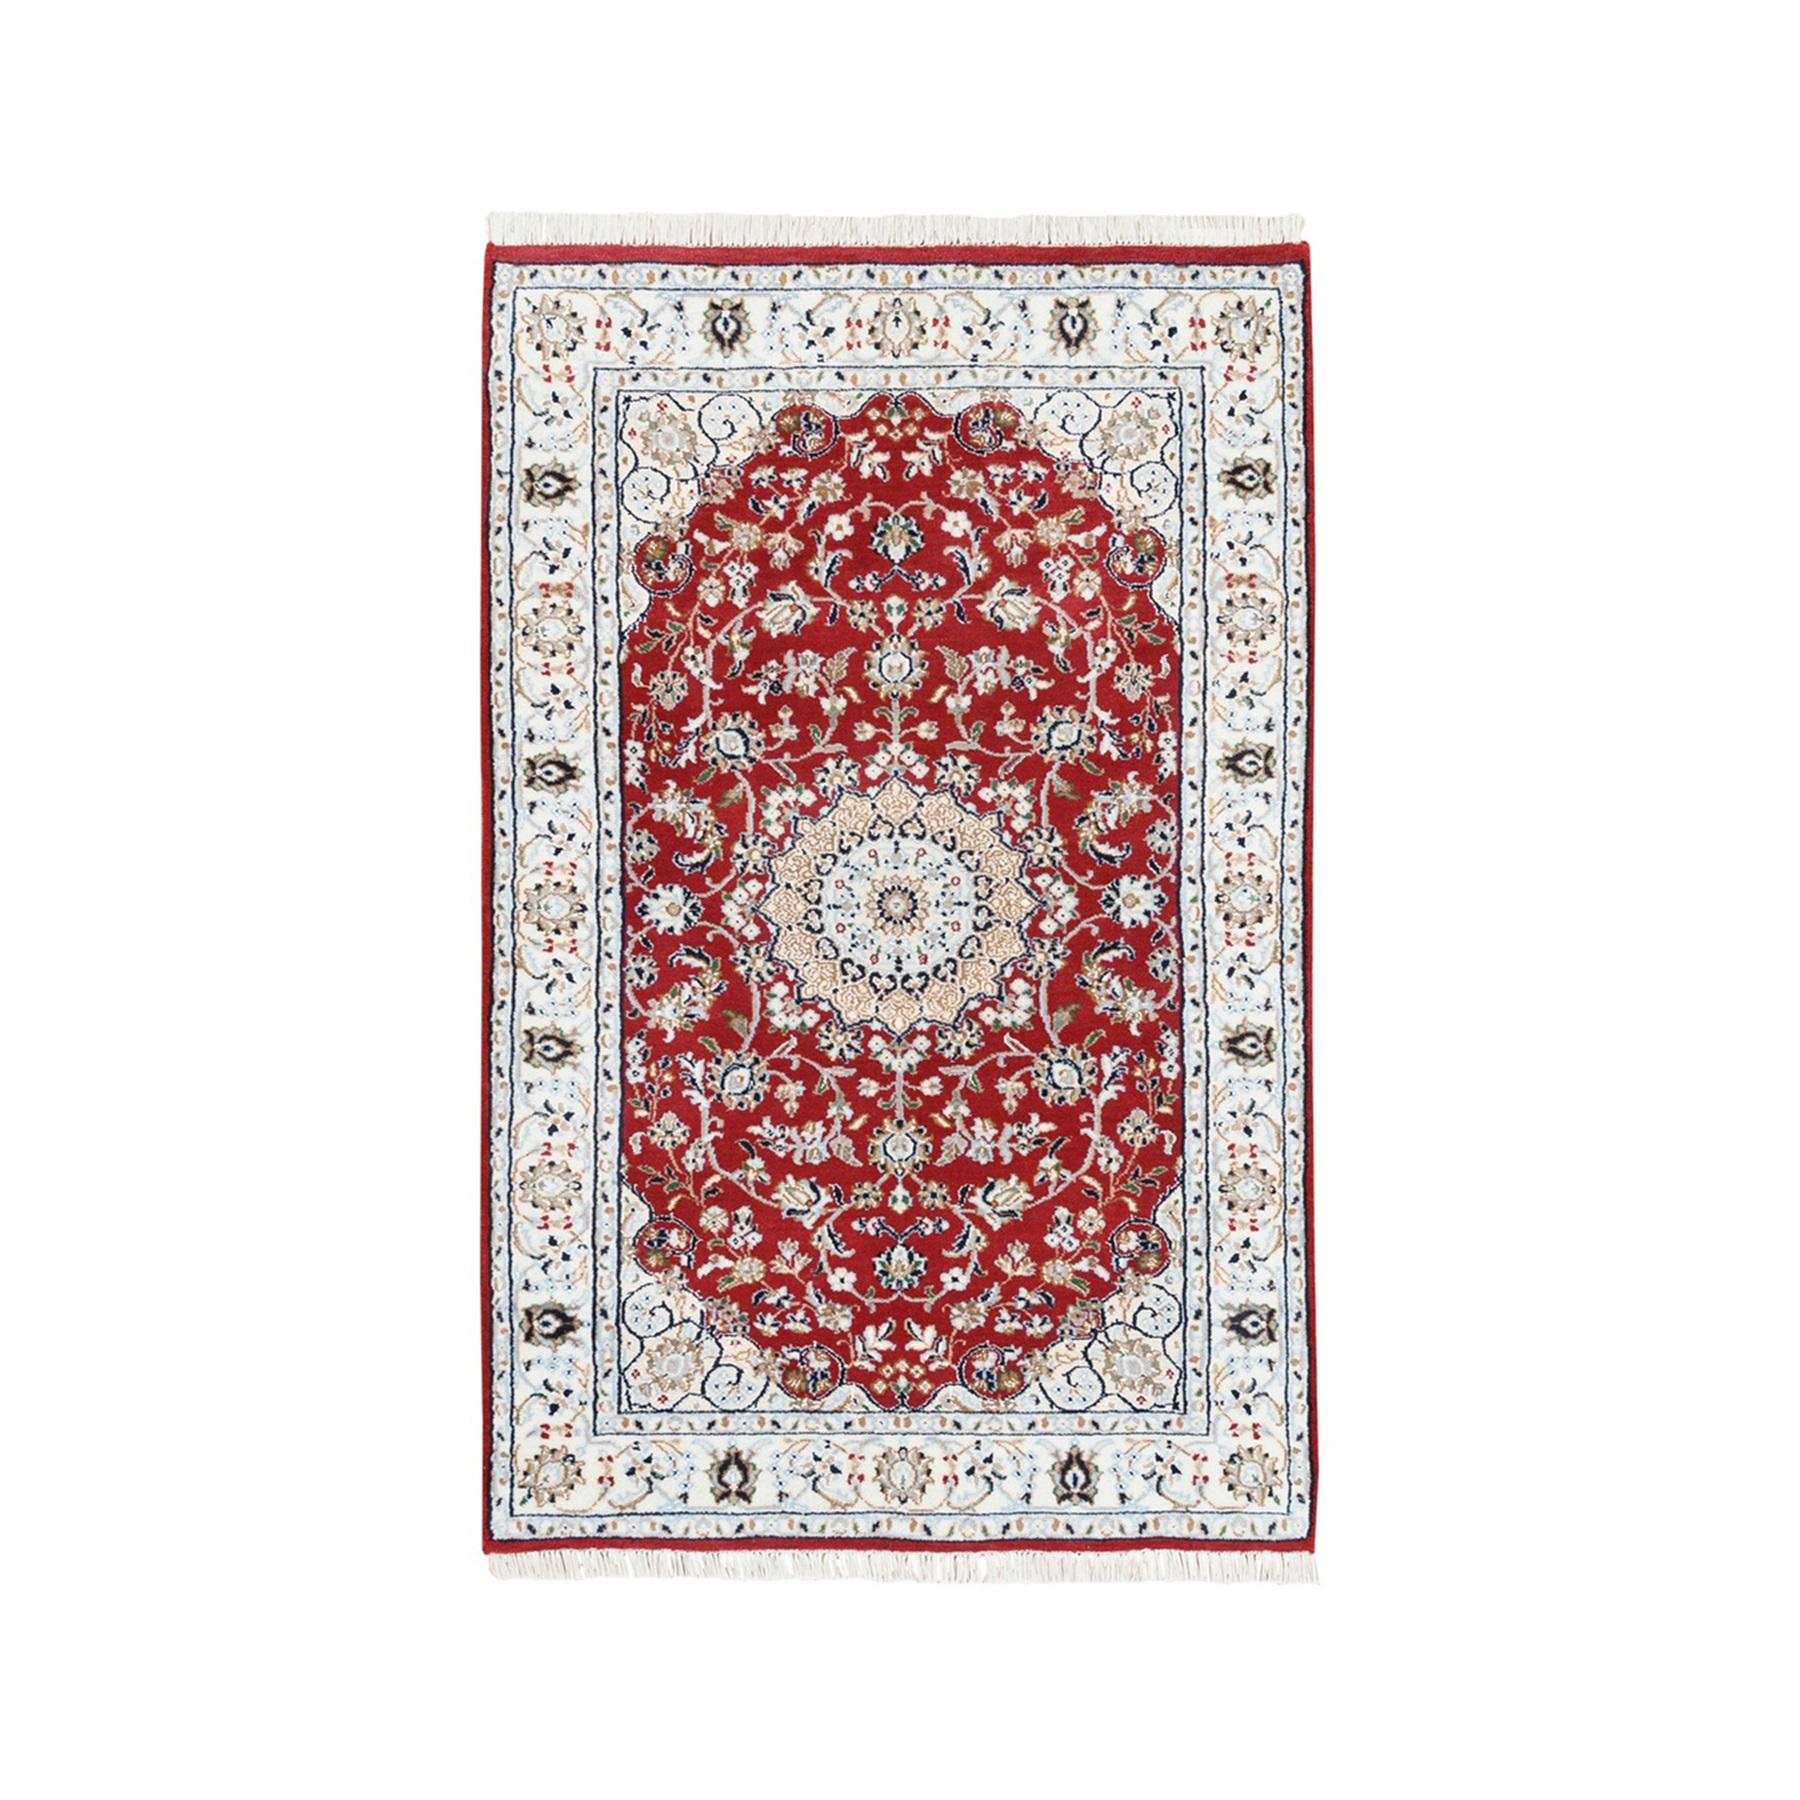 Pirniakan Collection Hand Knotted Red Rug No: 1125396